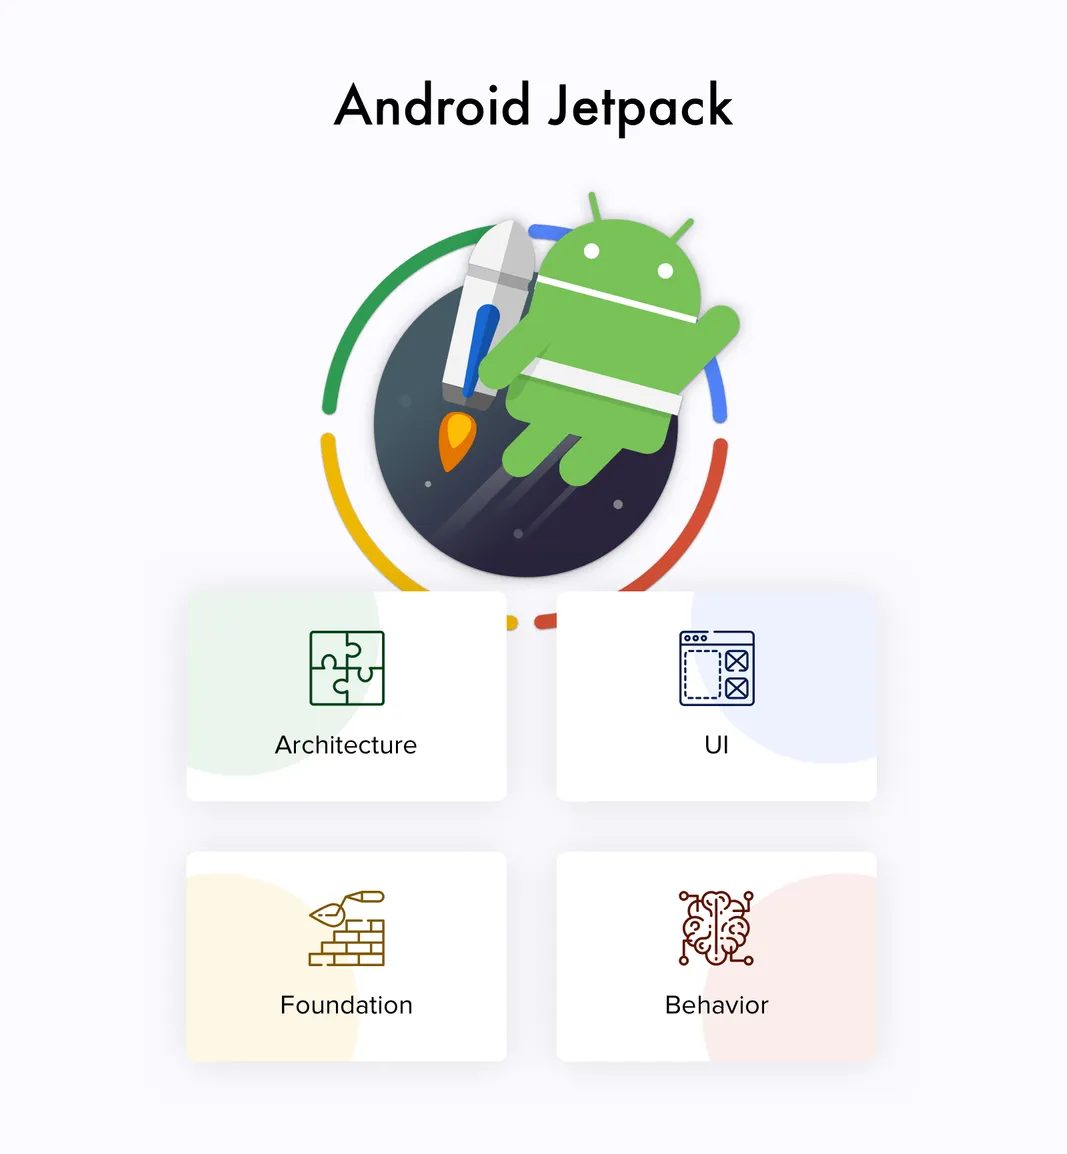 Android Jetpack library